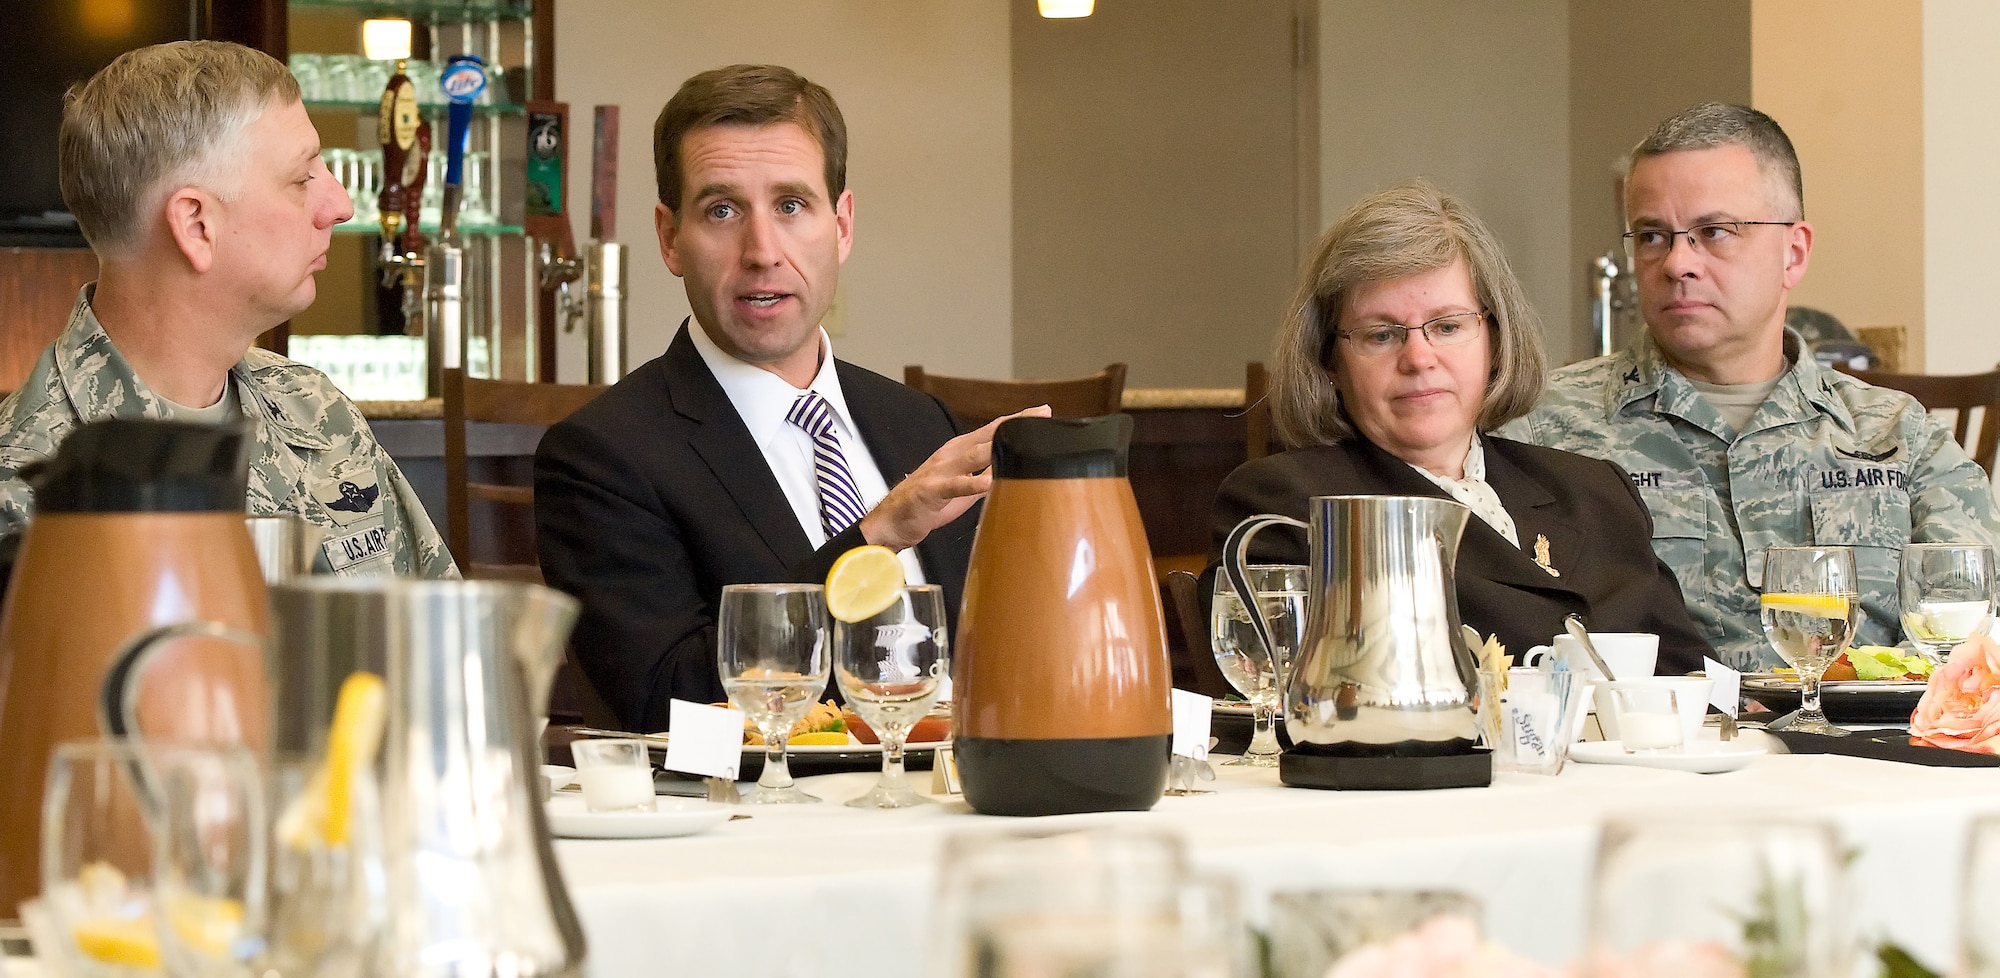 Col. Mark Camerer, left, commander of the 436th Airlift wing, Delaware Attorney General Beau Biden, Holly Petraeus, director of the Consumer Financial Protection Bureau’s Office of Servicemember Affairs, and Col. Randal Bright, commander of the 512th Airlift Wing, discuss consumer financial issues that service members face during a round table discussion Jan. 20, 2012, at The Eagle Creek Golf Course at Dover Air Force Base, Del.  They also met with local media during a press conference and hosted a town hall meeting with Airmen from Dover AFB to discuss issues including housing, for-profit schools, used car lots, loans, debt collection and the Servicemembers Civil Relief Act. (U.S. Air Force photo by Roland Balik)